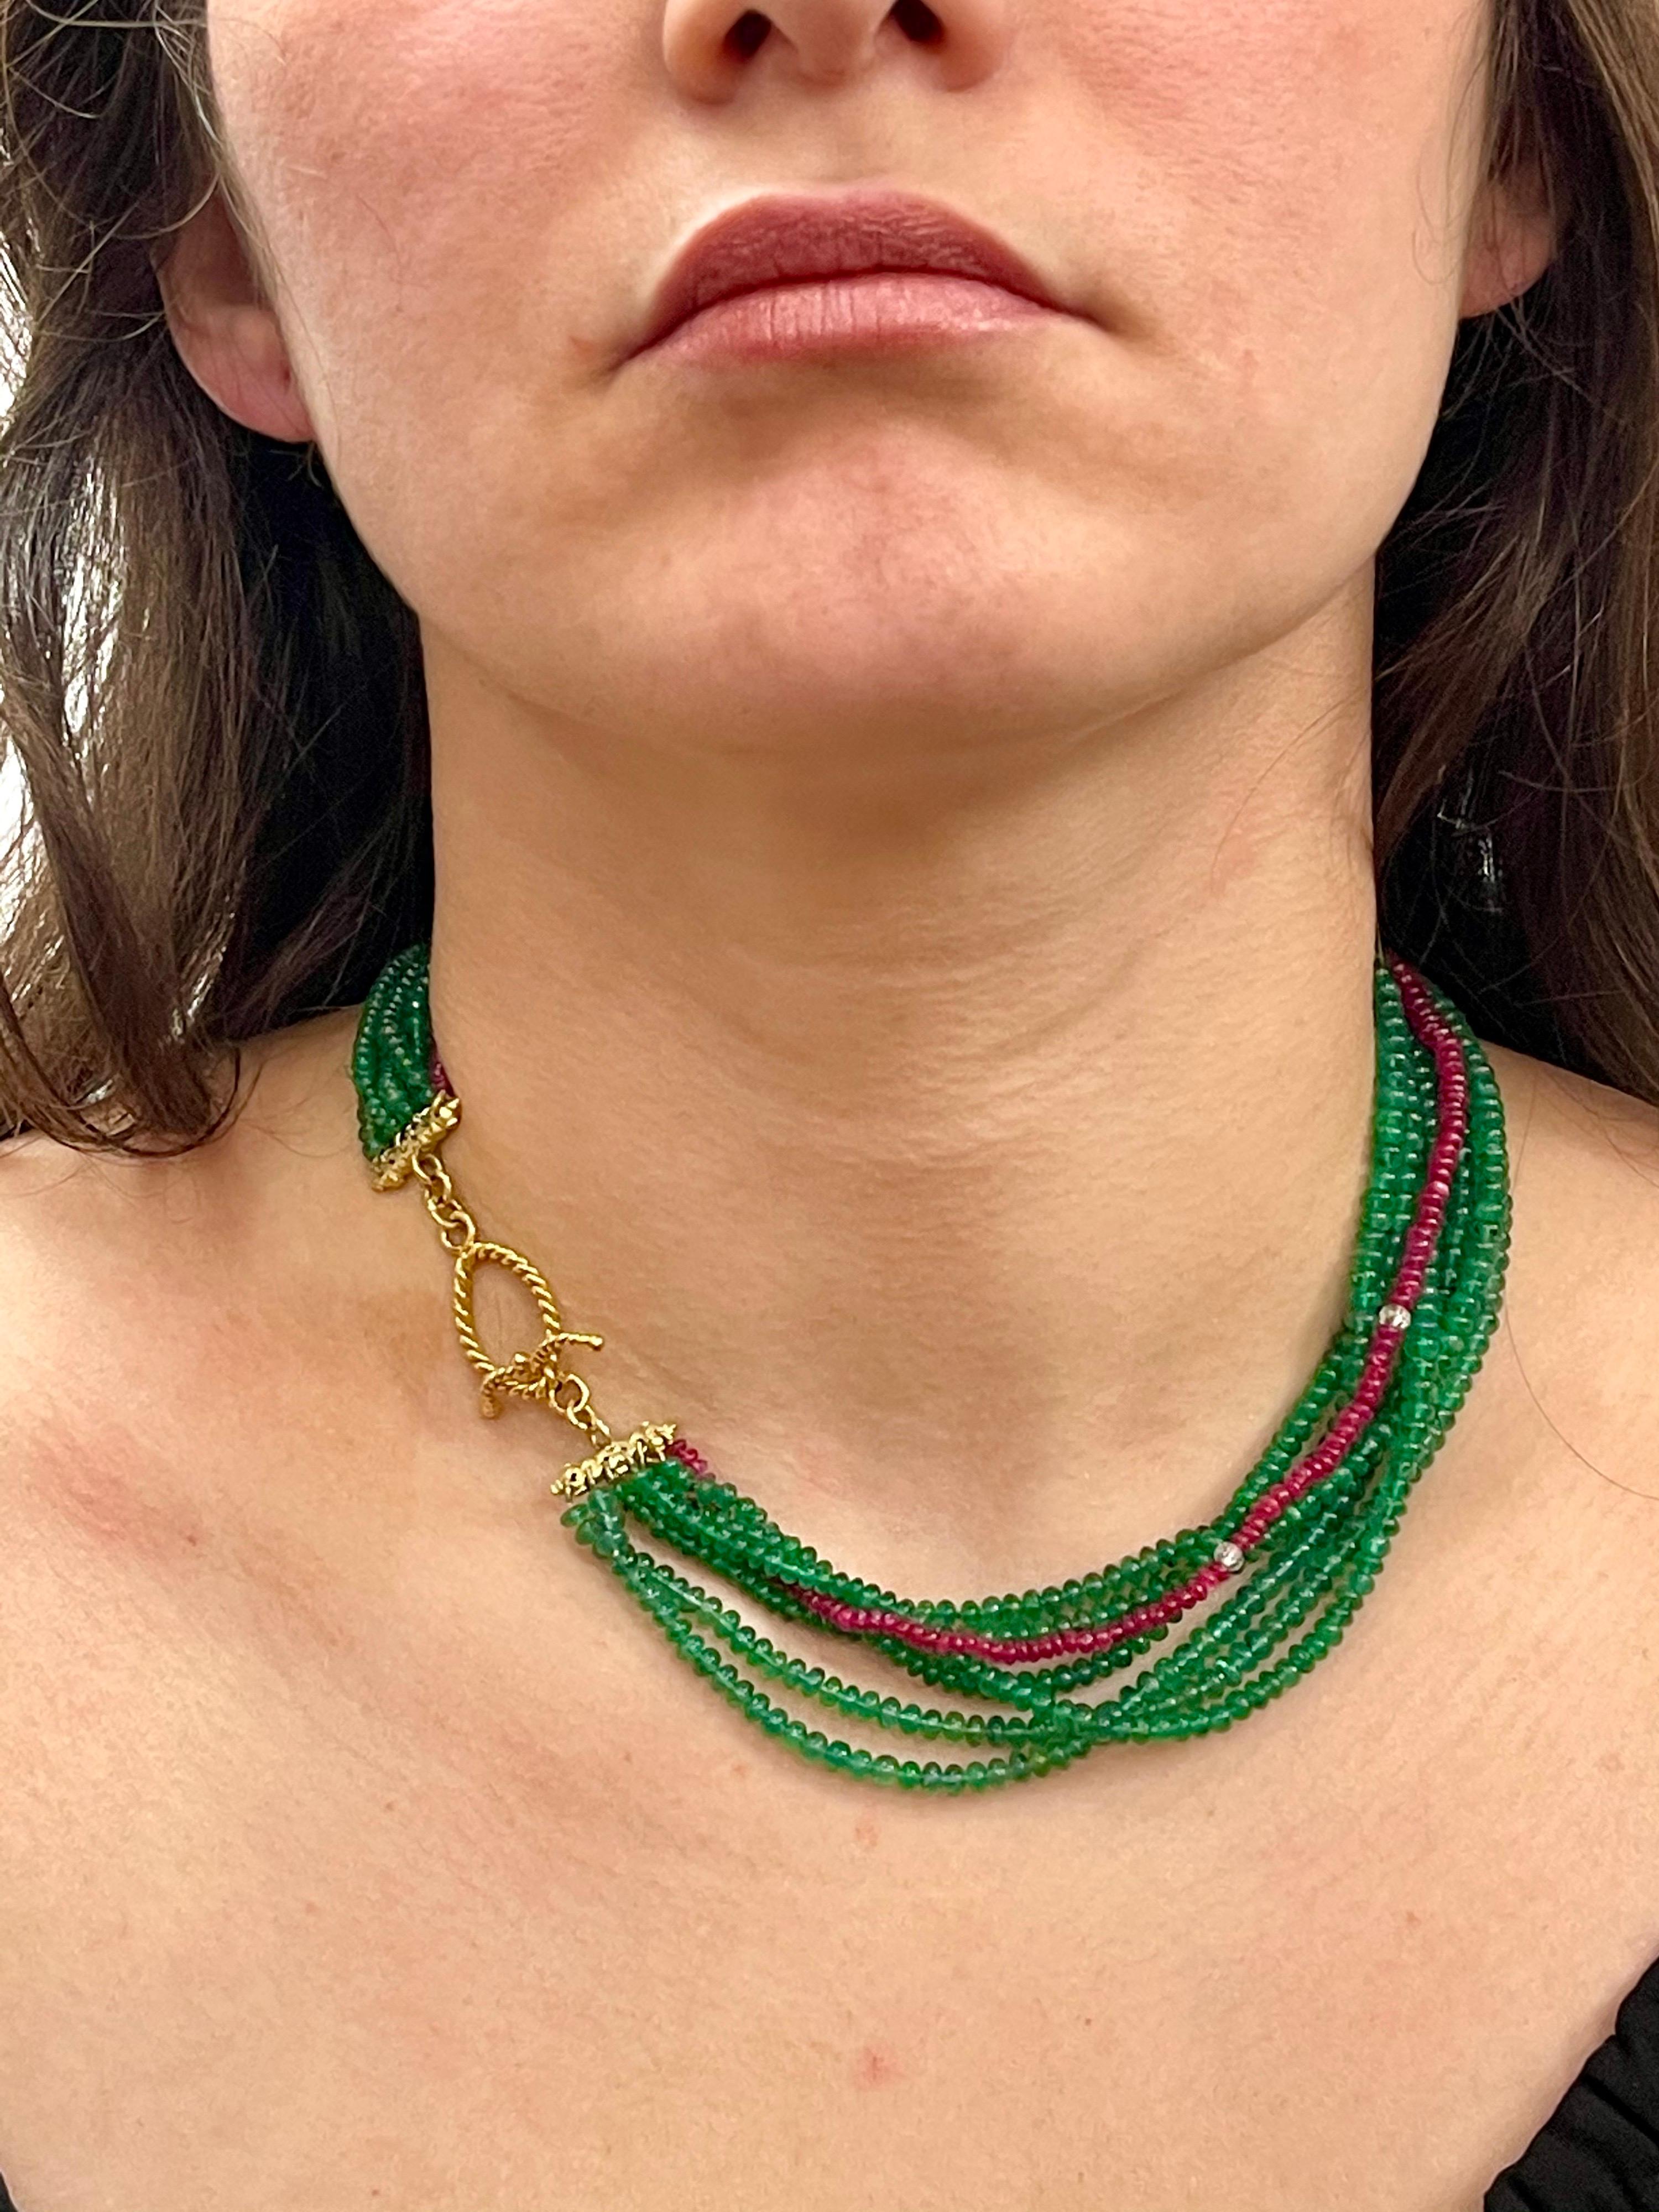 360 Carat Emerald, Burma Ruby and Diamond Beads Necklace 18 Karat Yellow Gold In Excellent Condition For Sale In New York, NY